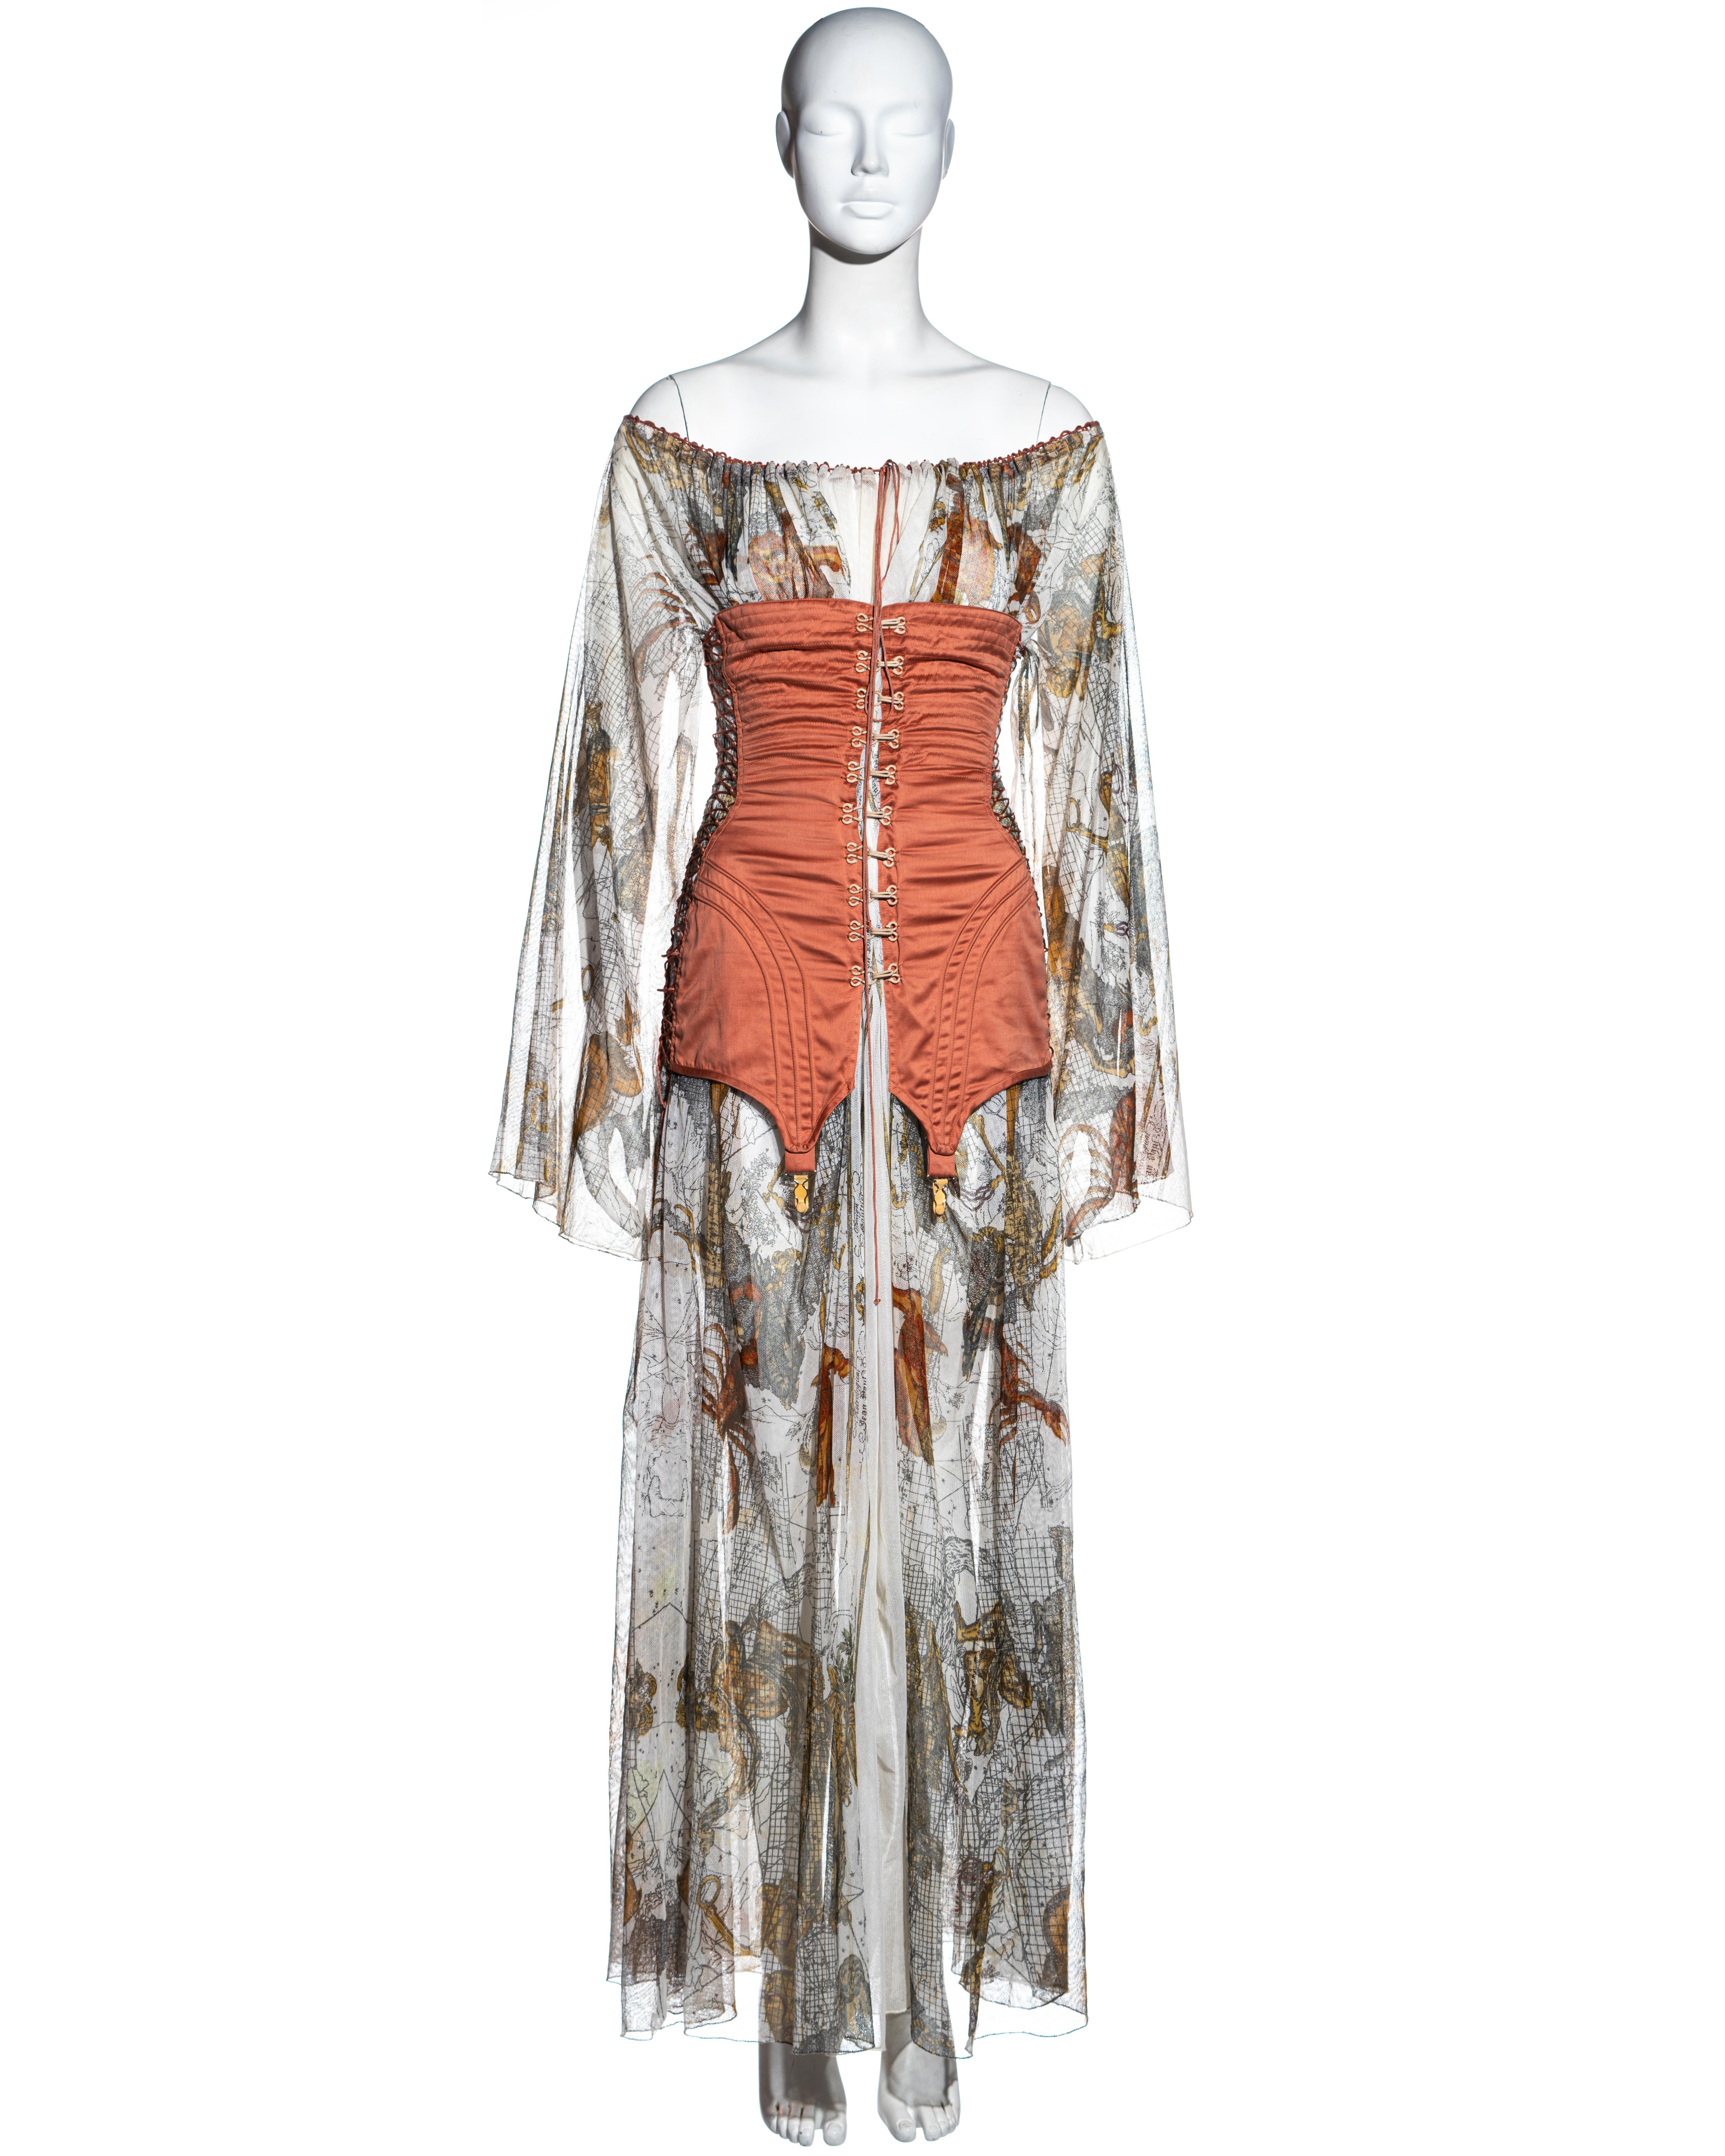 ▪ Jean Paul Gaultier 'Joan of Arc' cotton muslin maxi dress
▪ Zodiac map print 
▪ Appliqued salmon corset with garter straps 
▪ Hook fastenings to the front opening 
▪ Lace-up fastenings to the back and side openings 
▪ Drawstring fastening to the